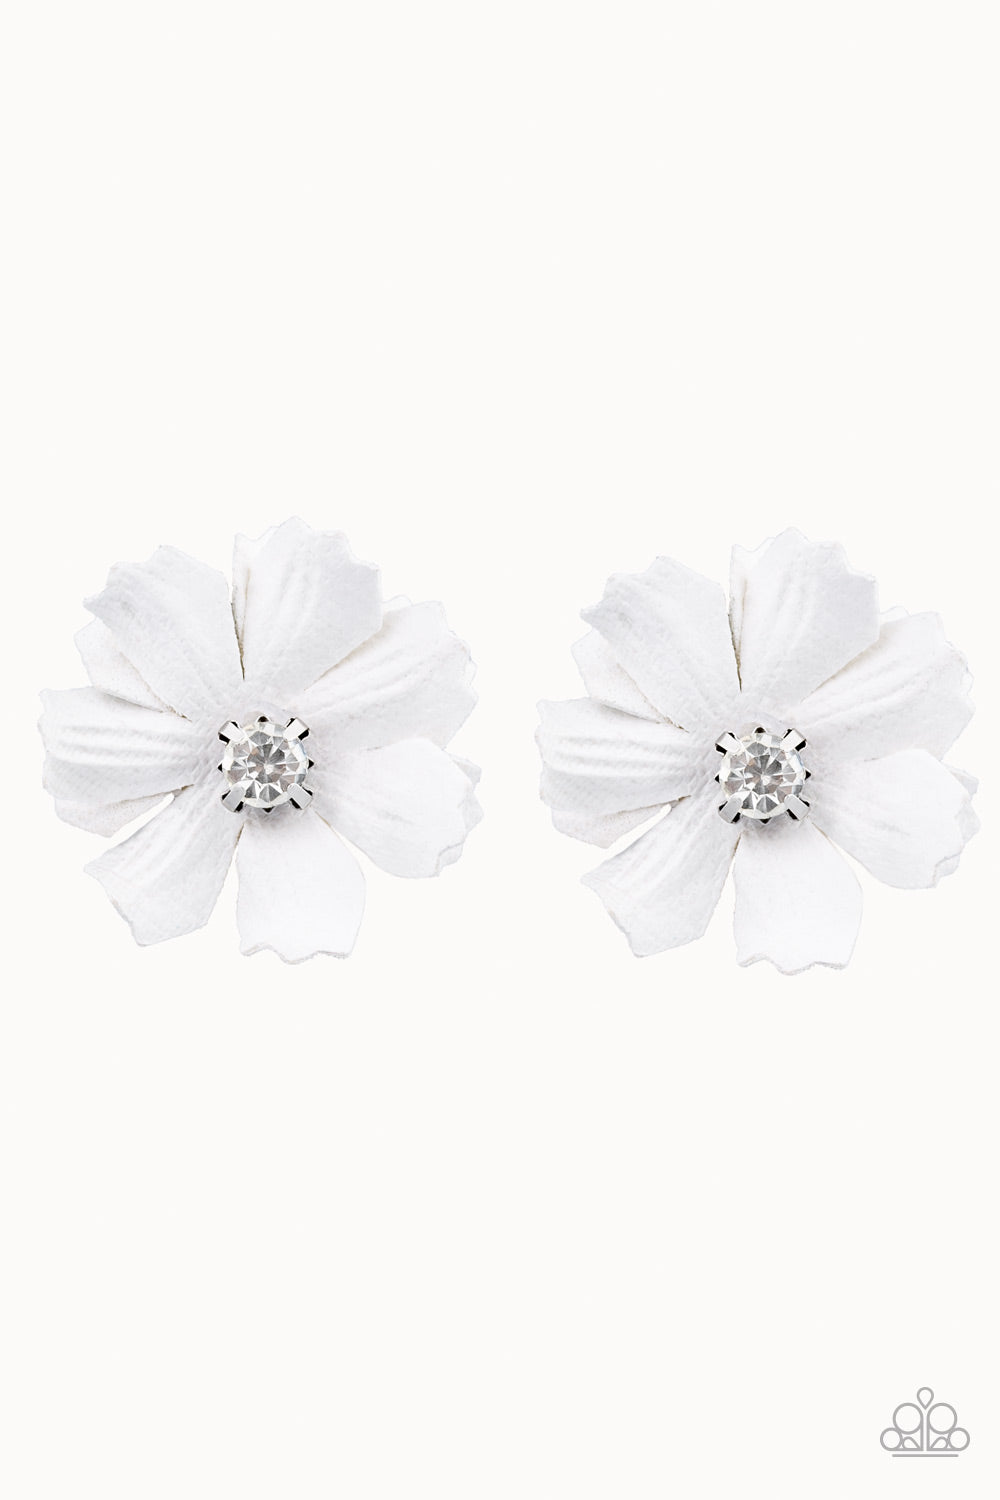 Paparazzi Candid Carnations White Hairbow Duo